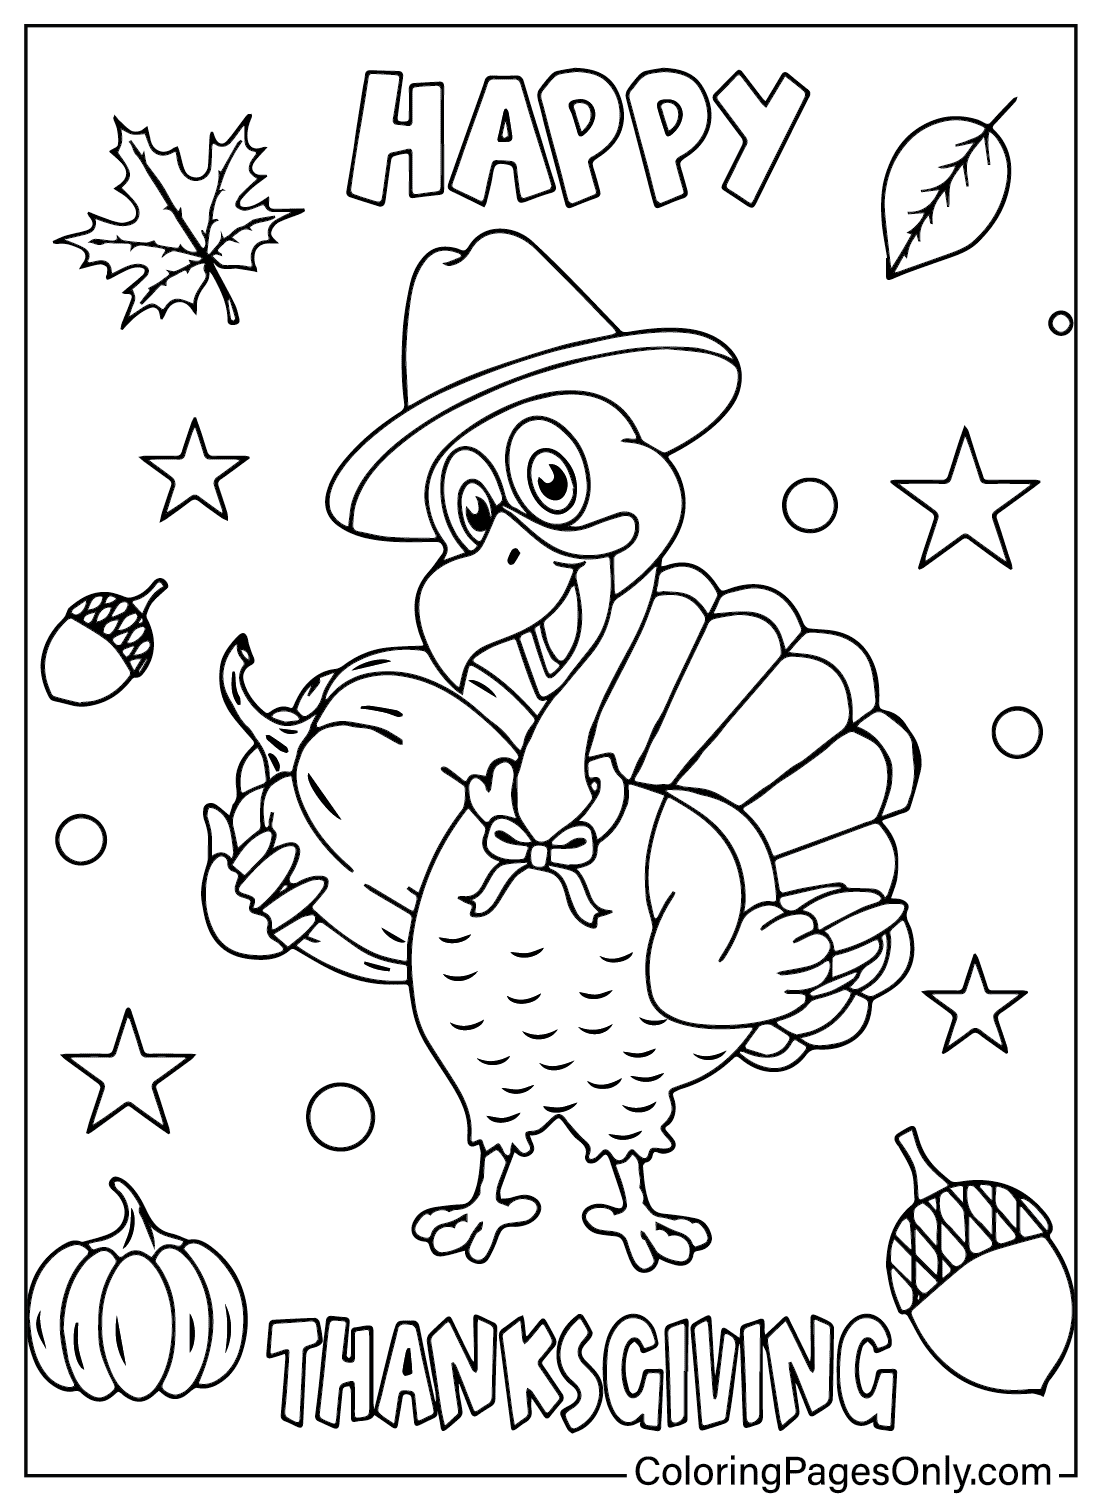 Coloring Page Turkey from Turkey